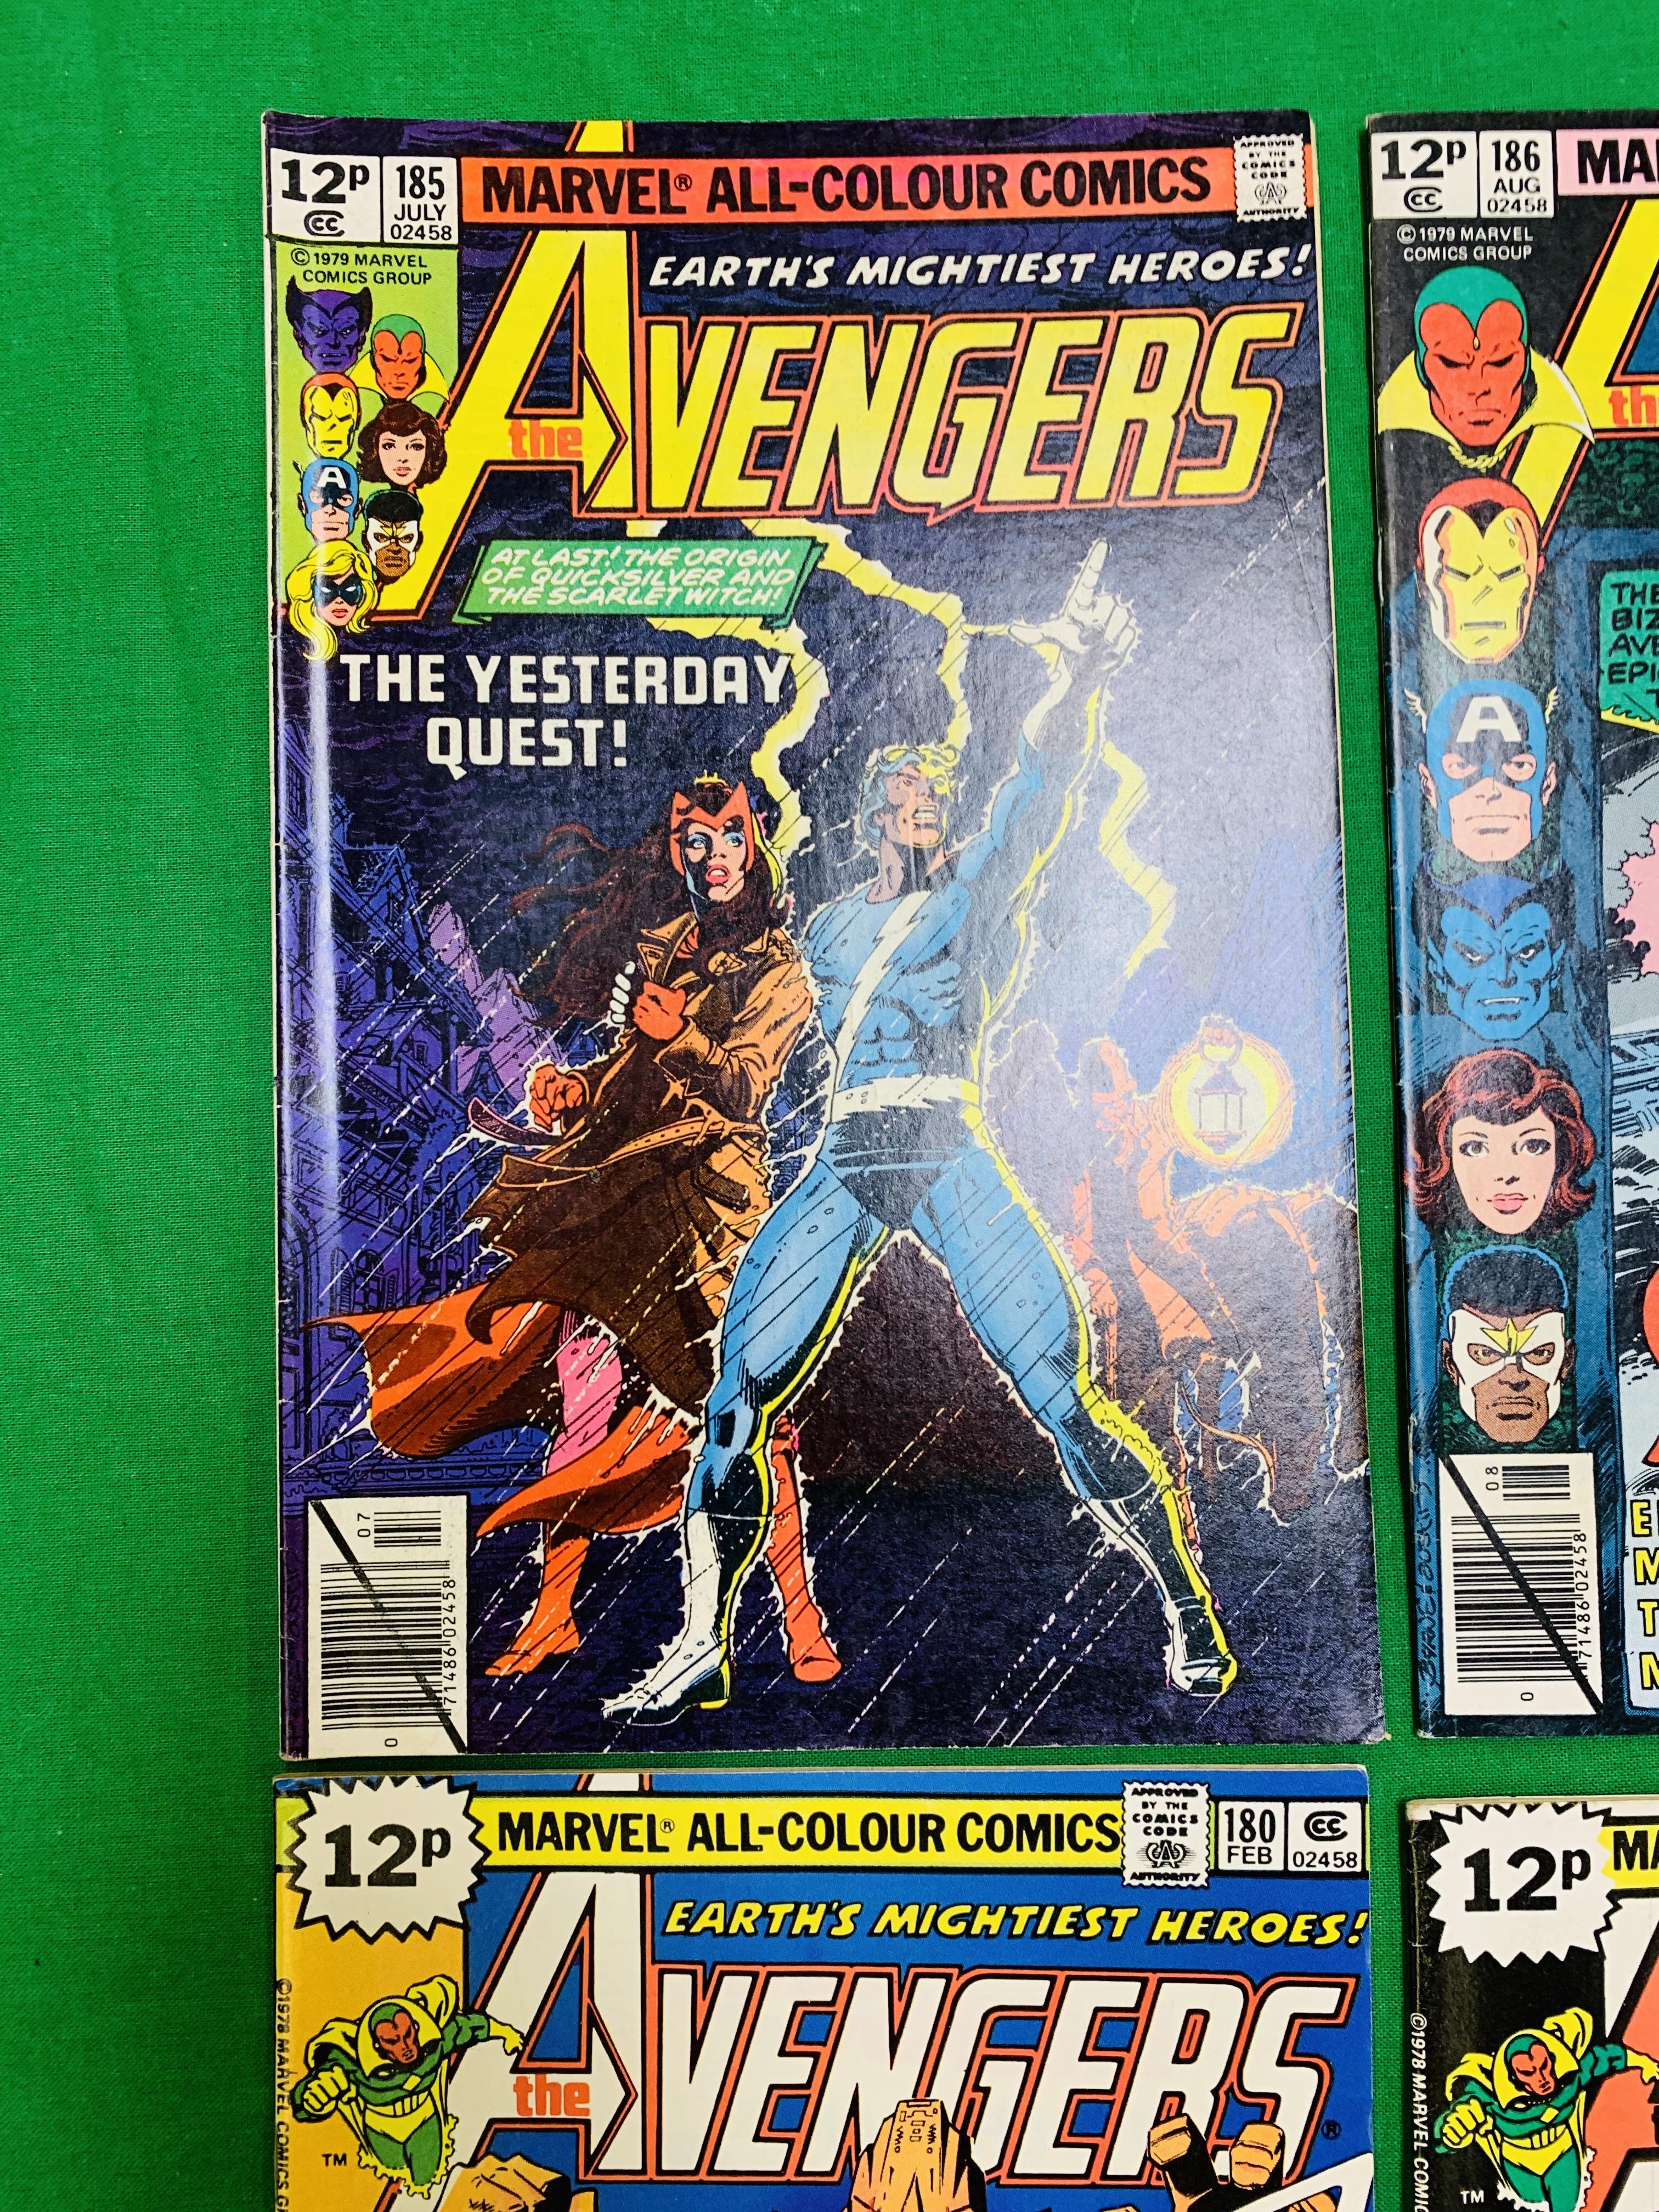 MARVEL COMICS THE AVENGERS NO. 101 - 299, MISSING ISSUES 103 AND 110. - Image 58 of 130